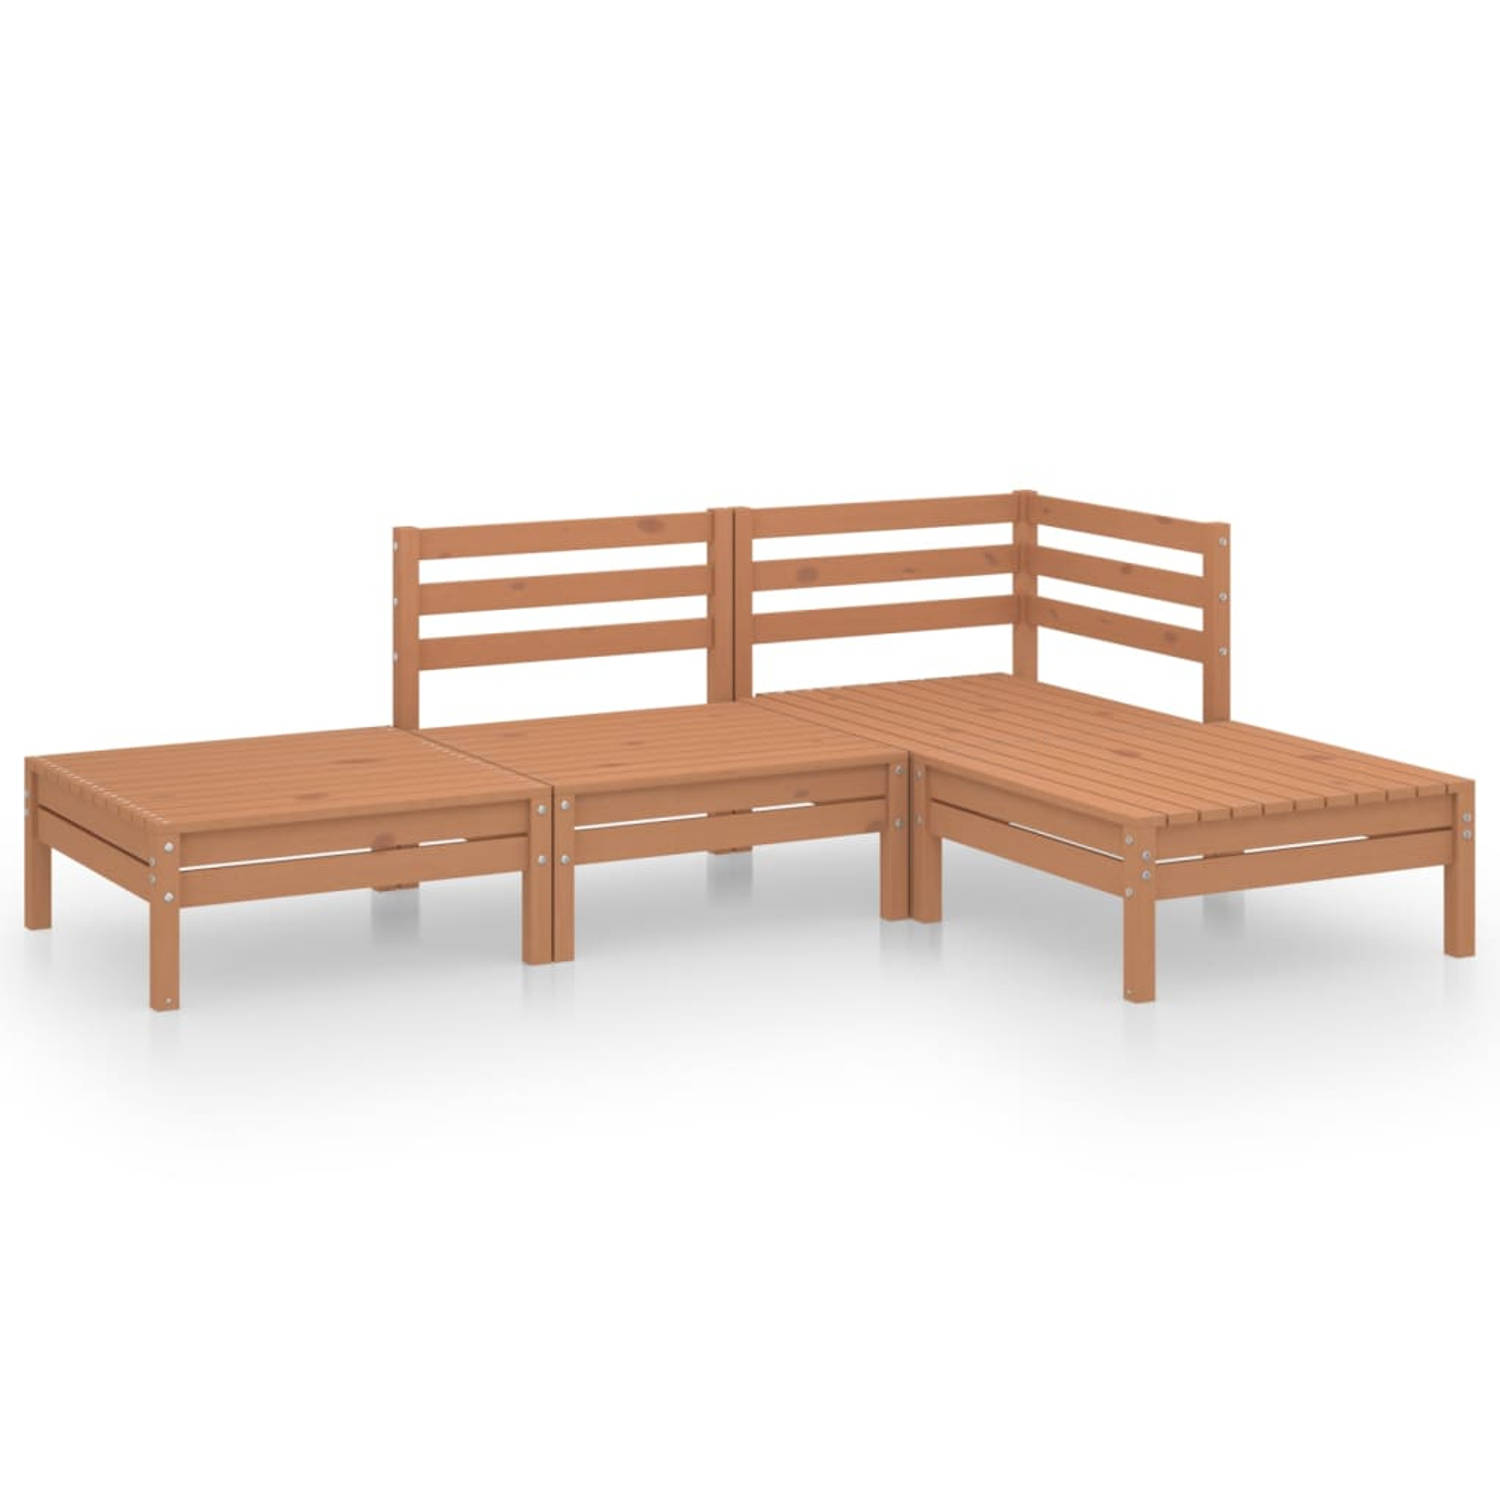 The Living Store 4-delige Loungeset massief grenenhout honingbruin - Tuinset